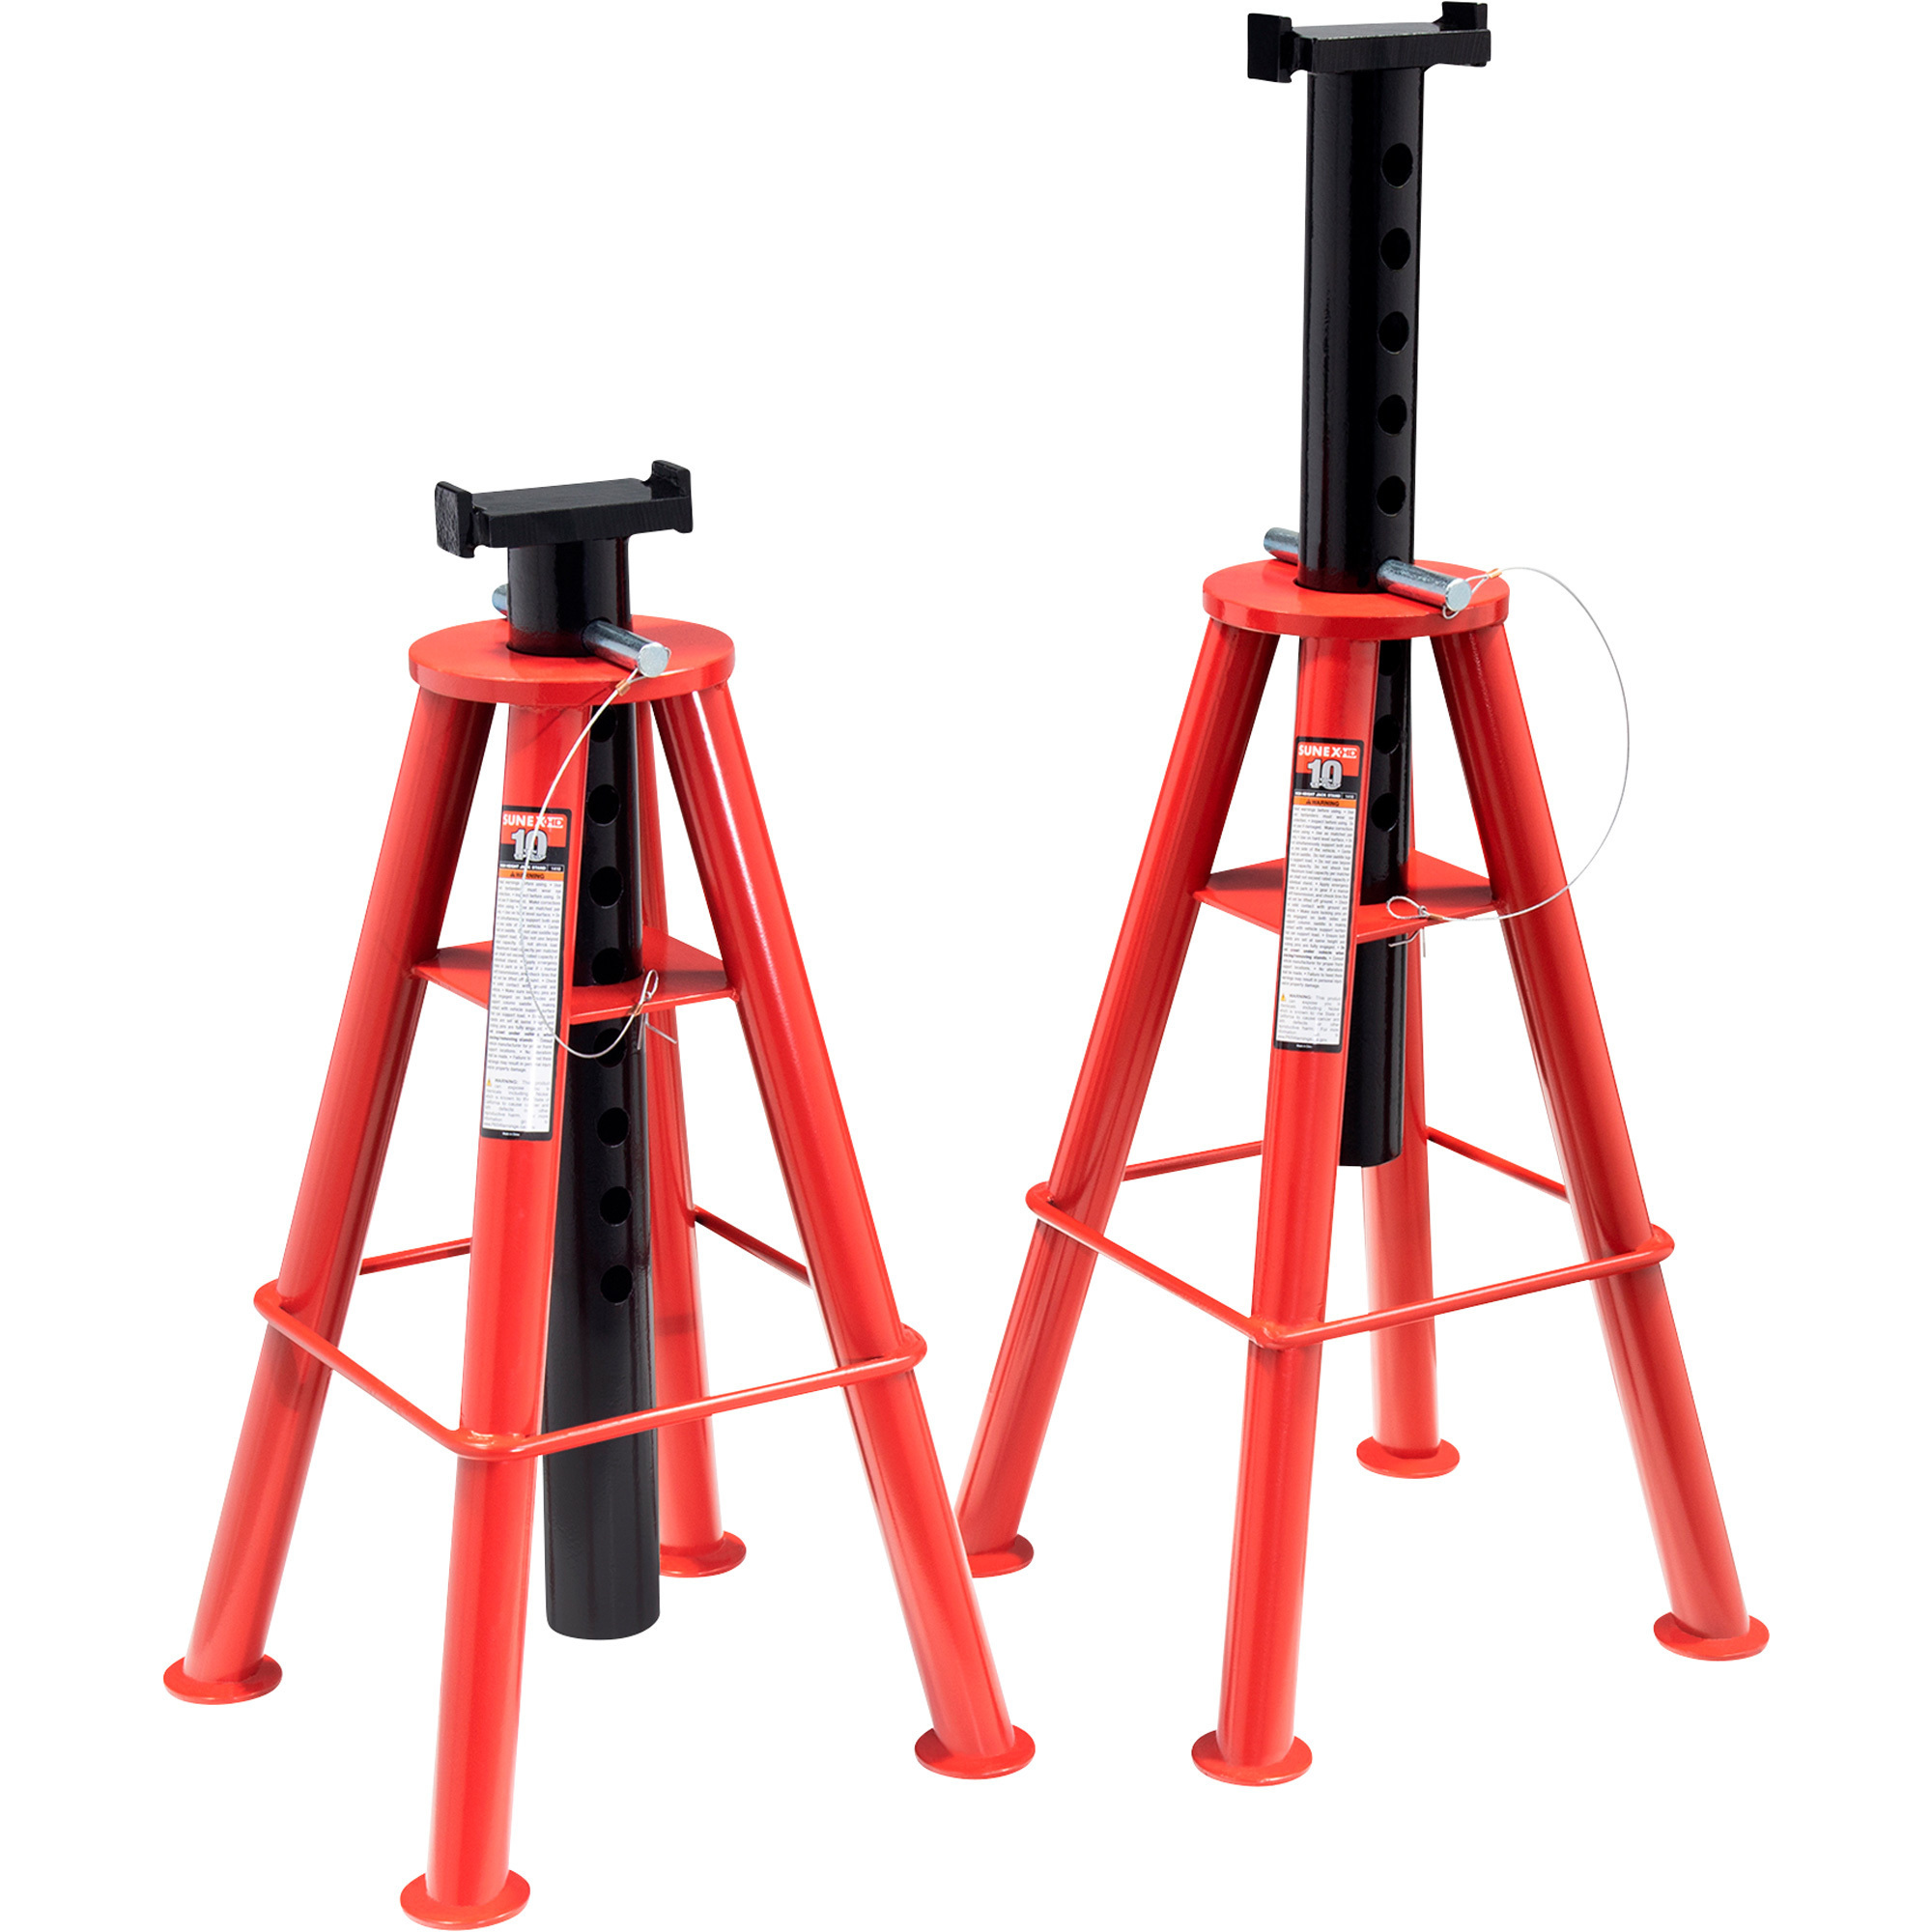 Sunex High-Height Pin-Type 10-Ton Jack Stands, Pair, Model 1410